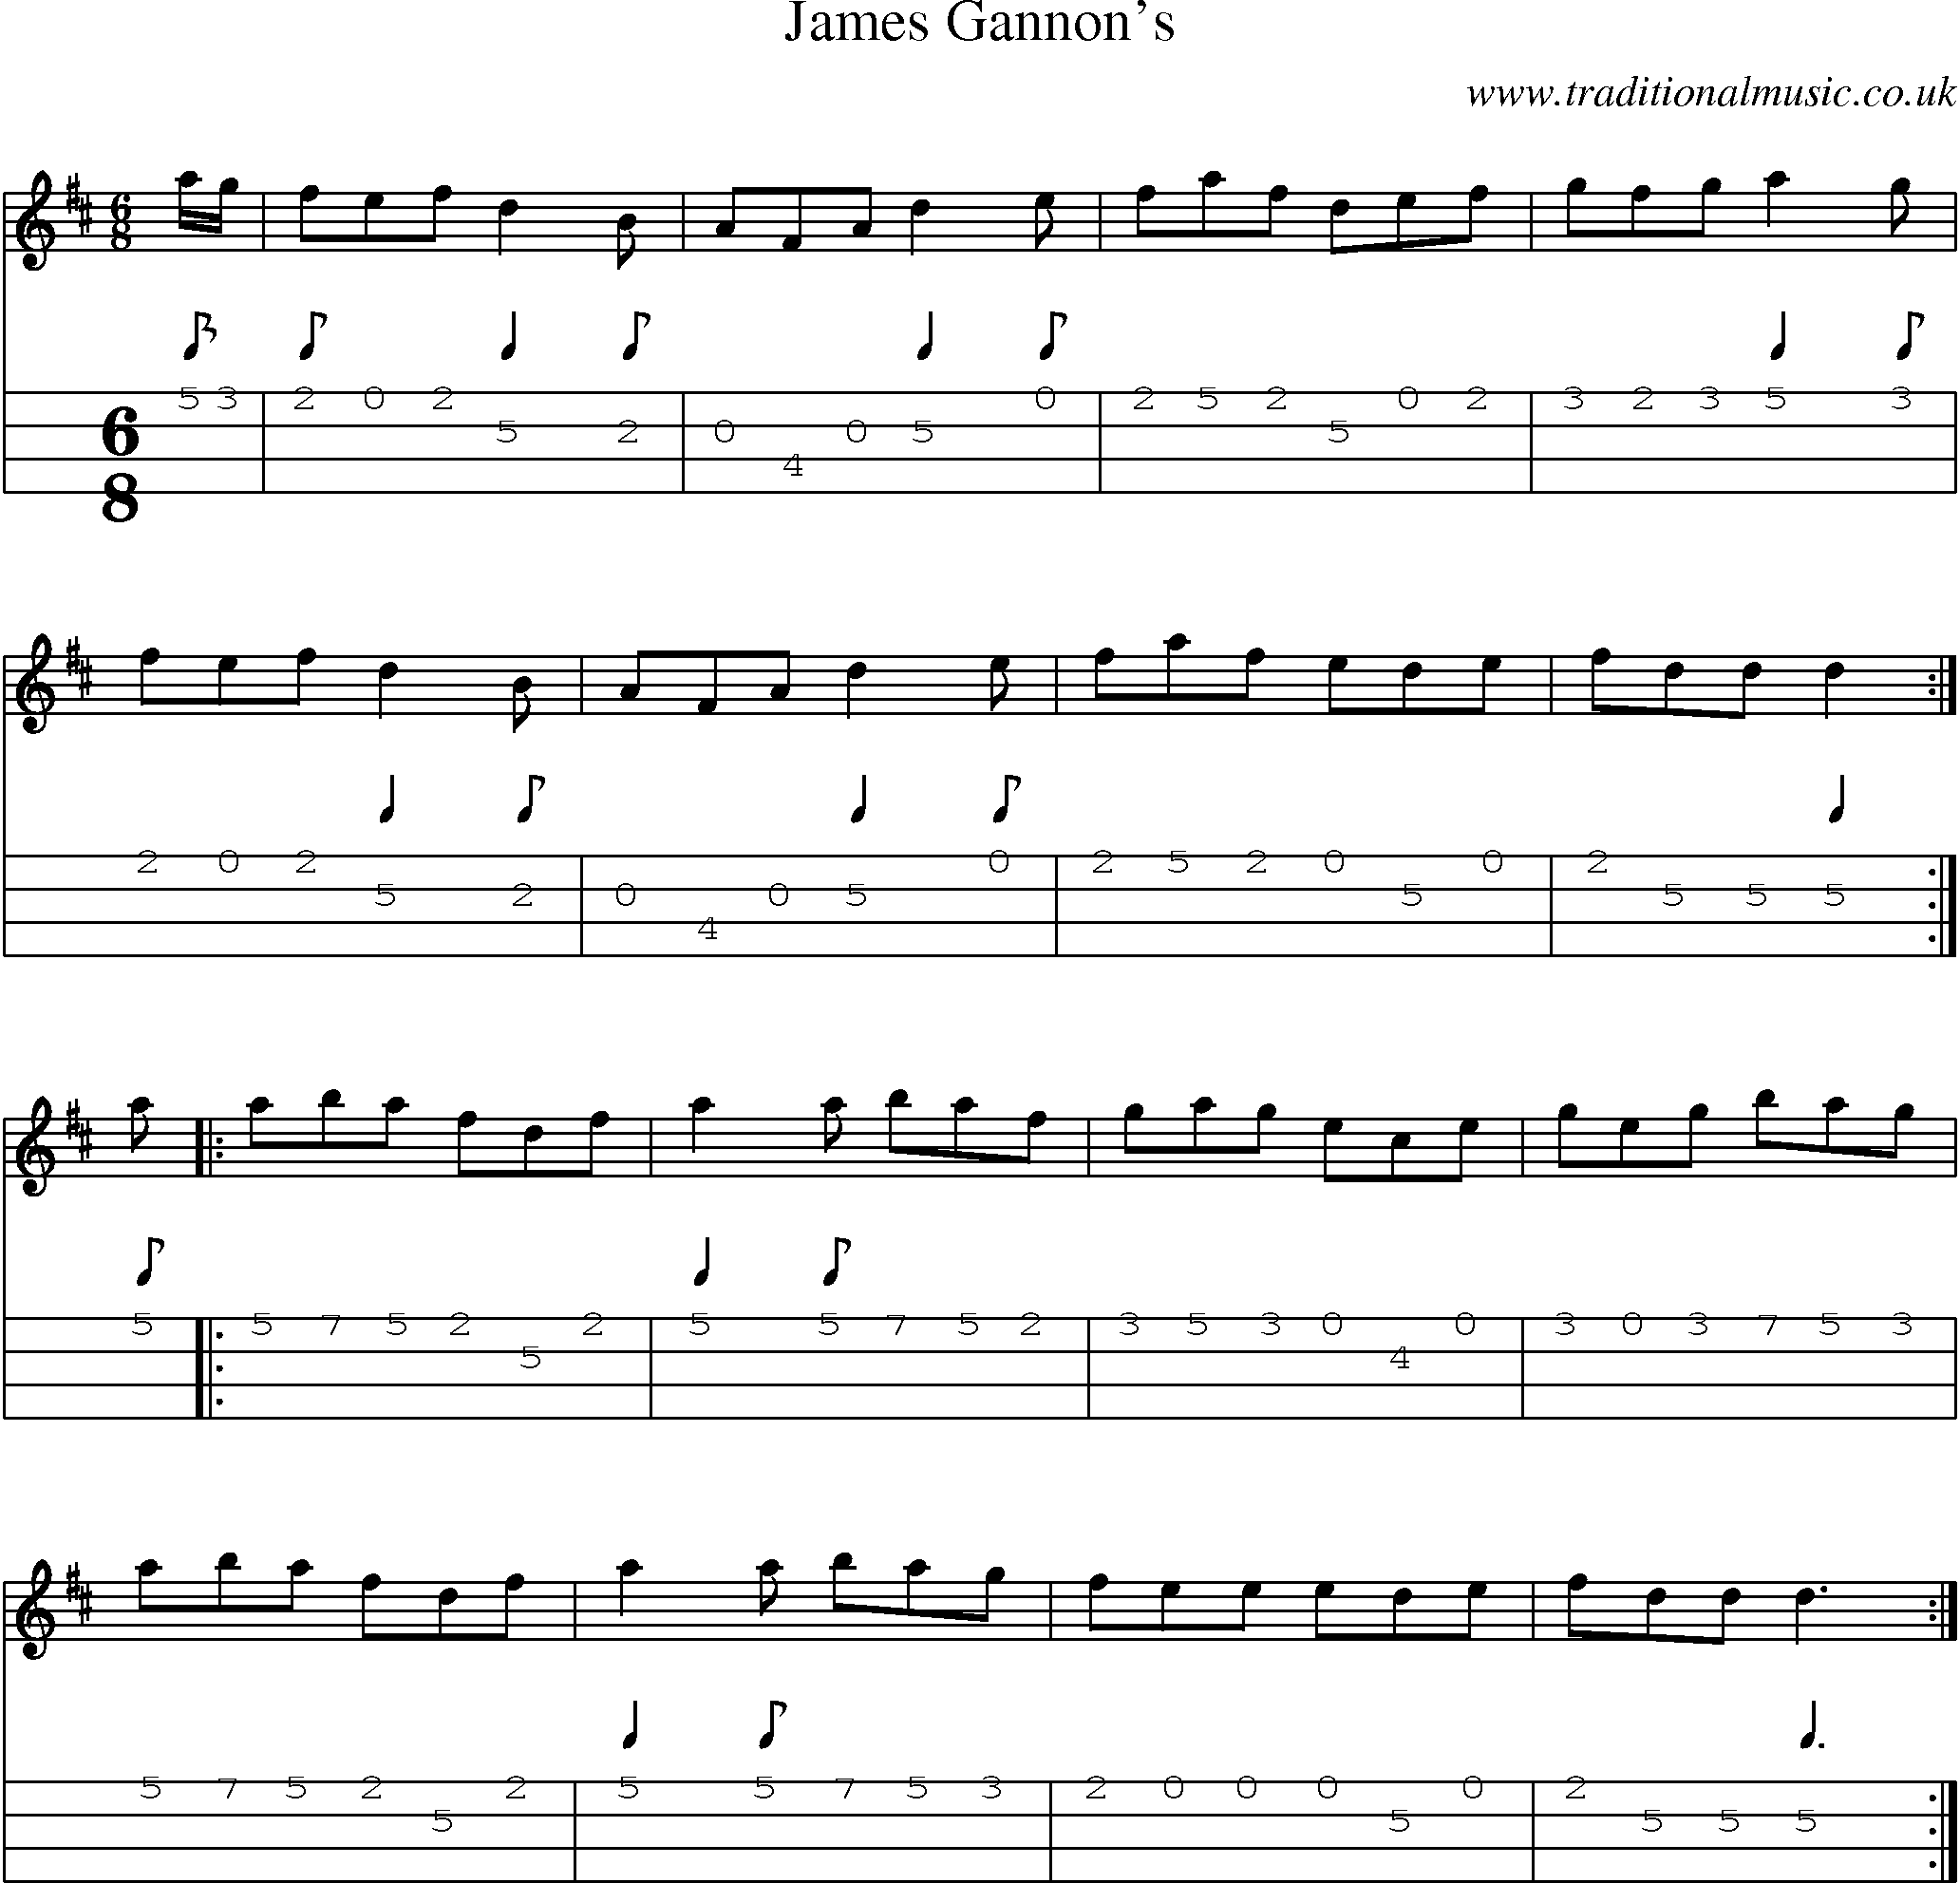 Music Score and Mandolin Tabs for James Gannons